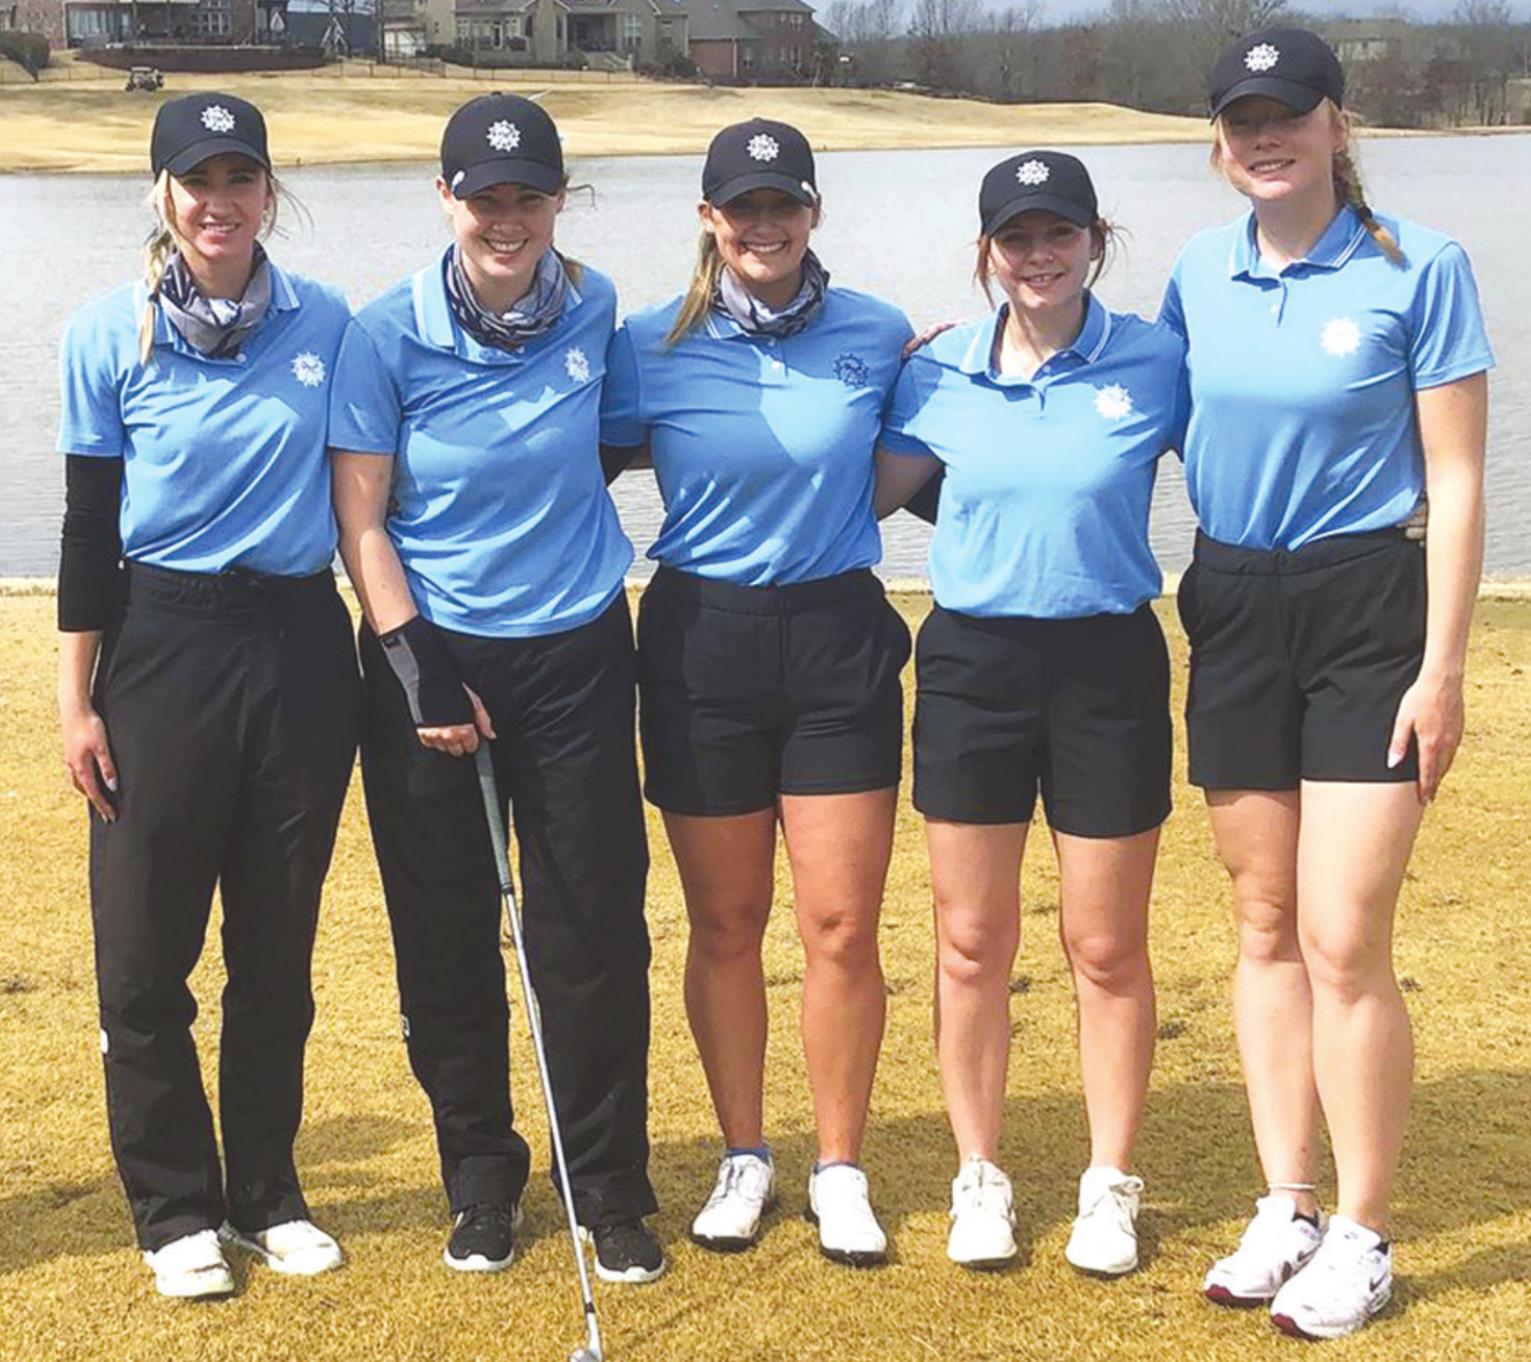 The SWOSU women’s golf team finished third at the Natural State Golf Classic in Cabot, Arkansas. Provided